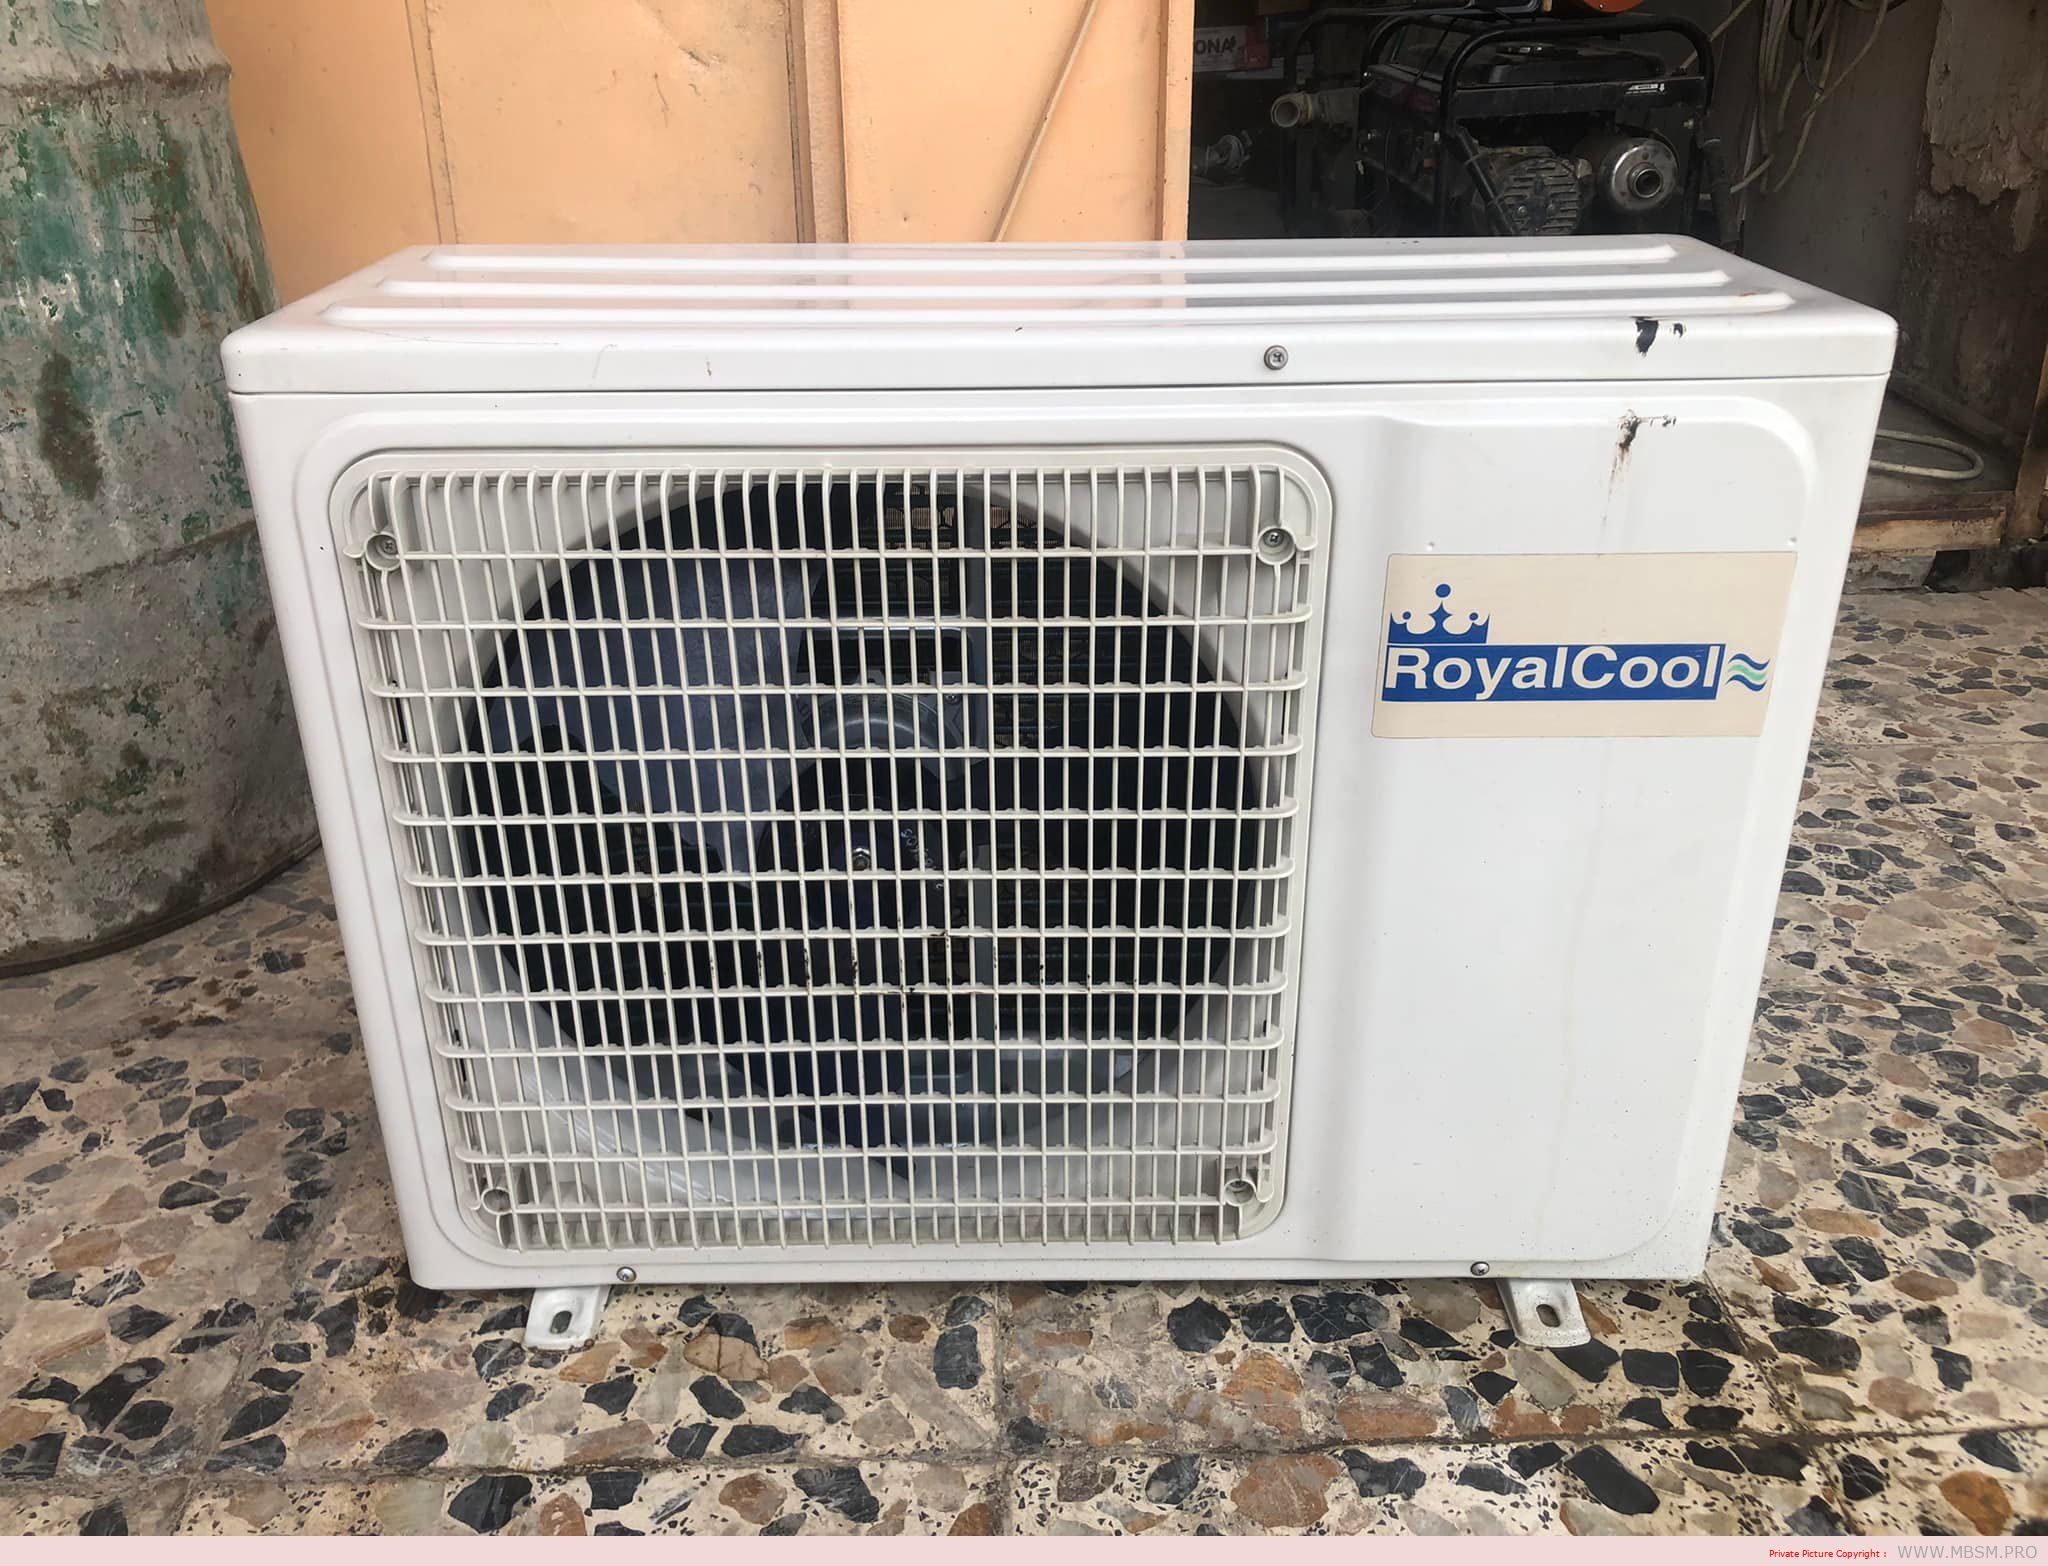 mbsmpro-air-conditioner-royalcool-rcw12ch-rco12ch-12000-btu-cooling-heating-1-ton-mbsm-dot-pro